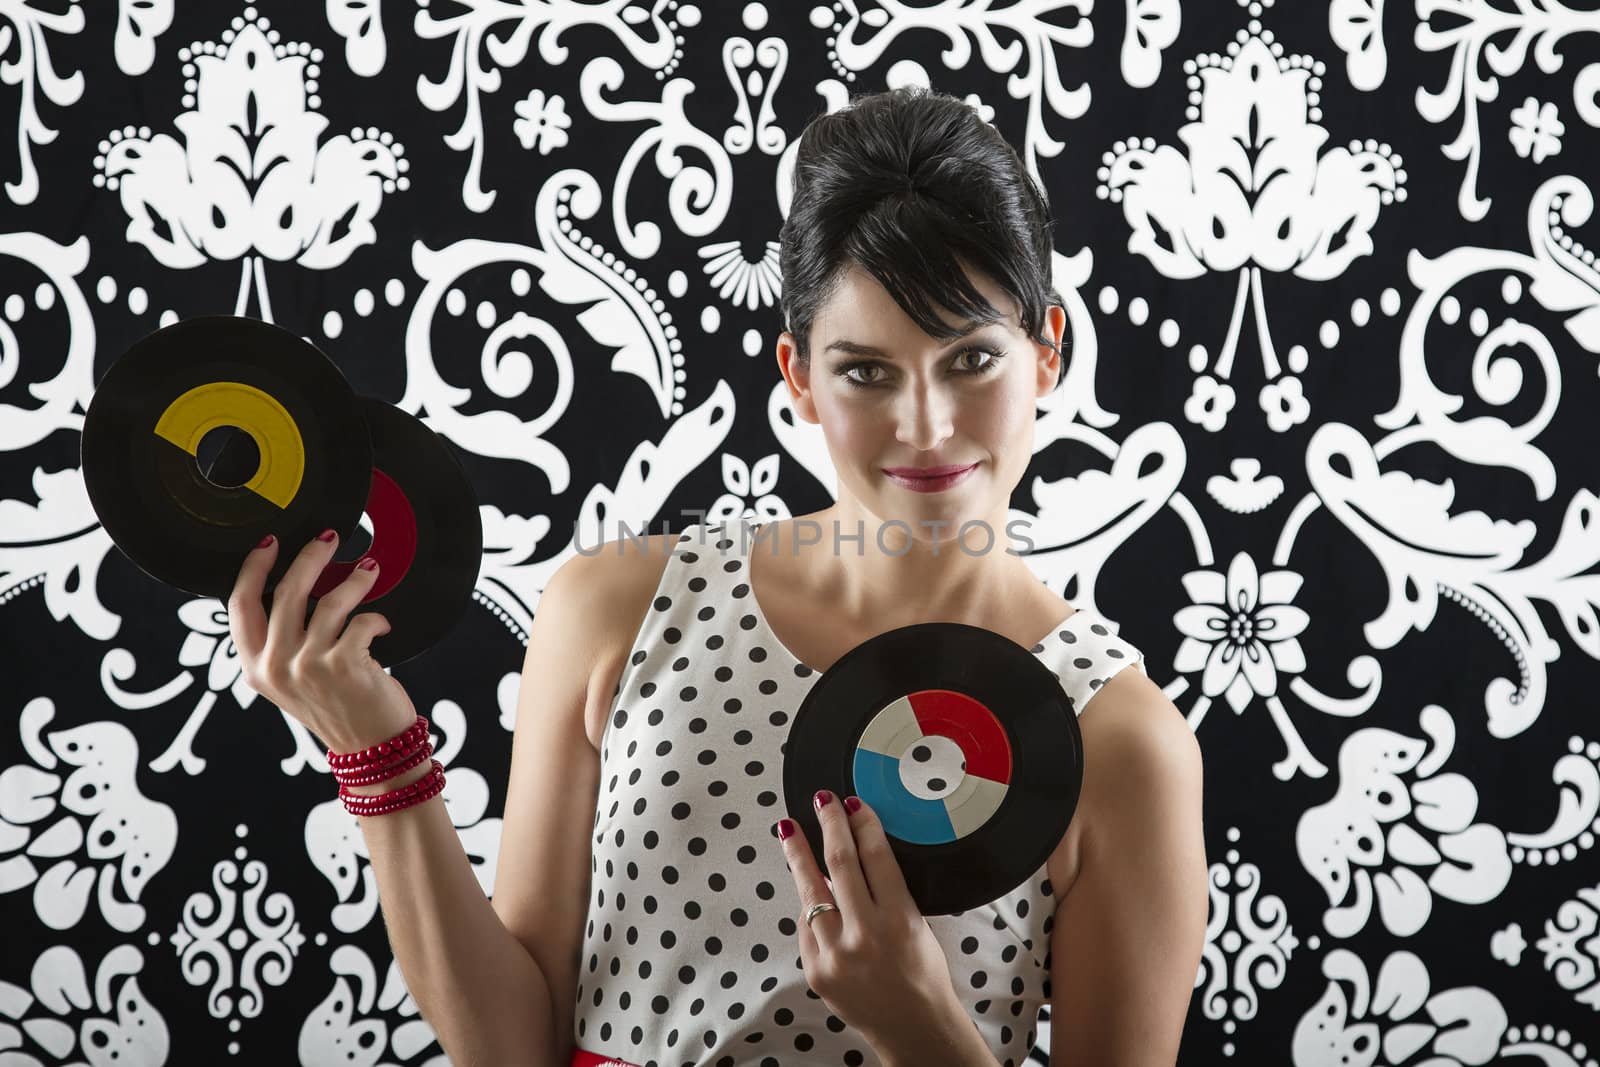 young woman is stylist 60's inspired clothing, showing off three vinyl records